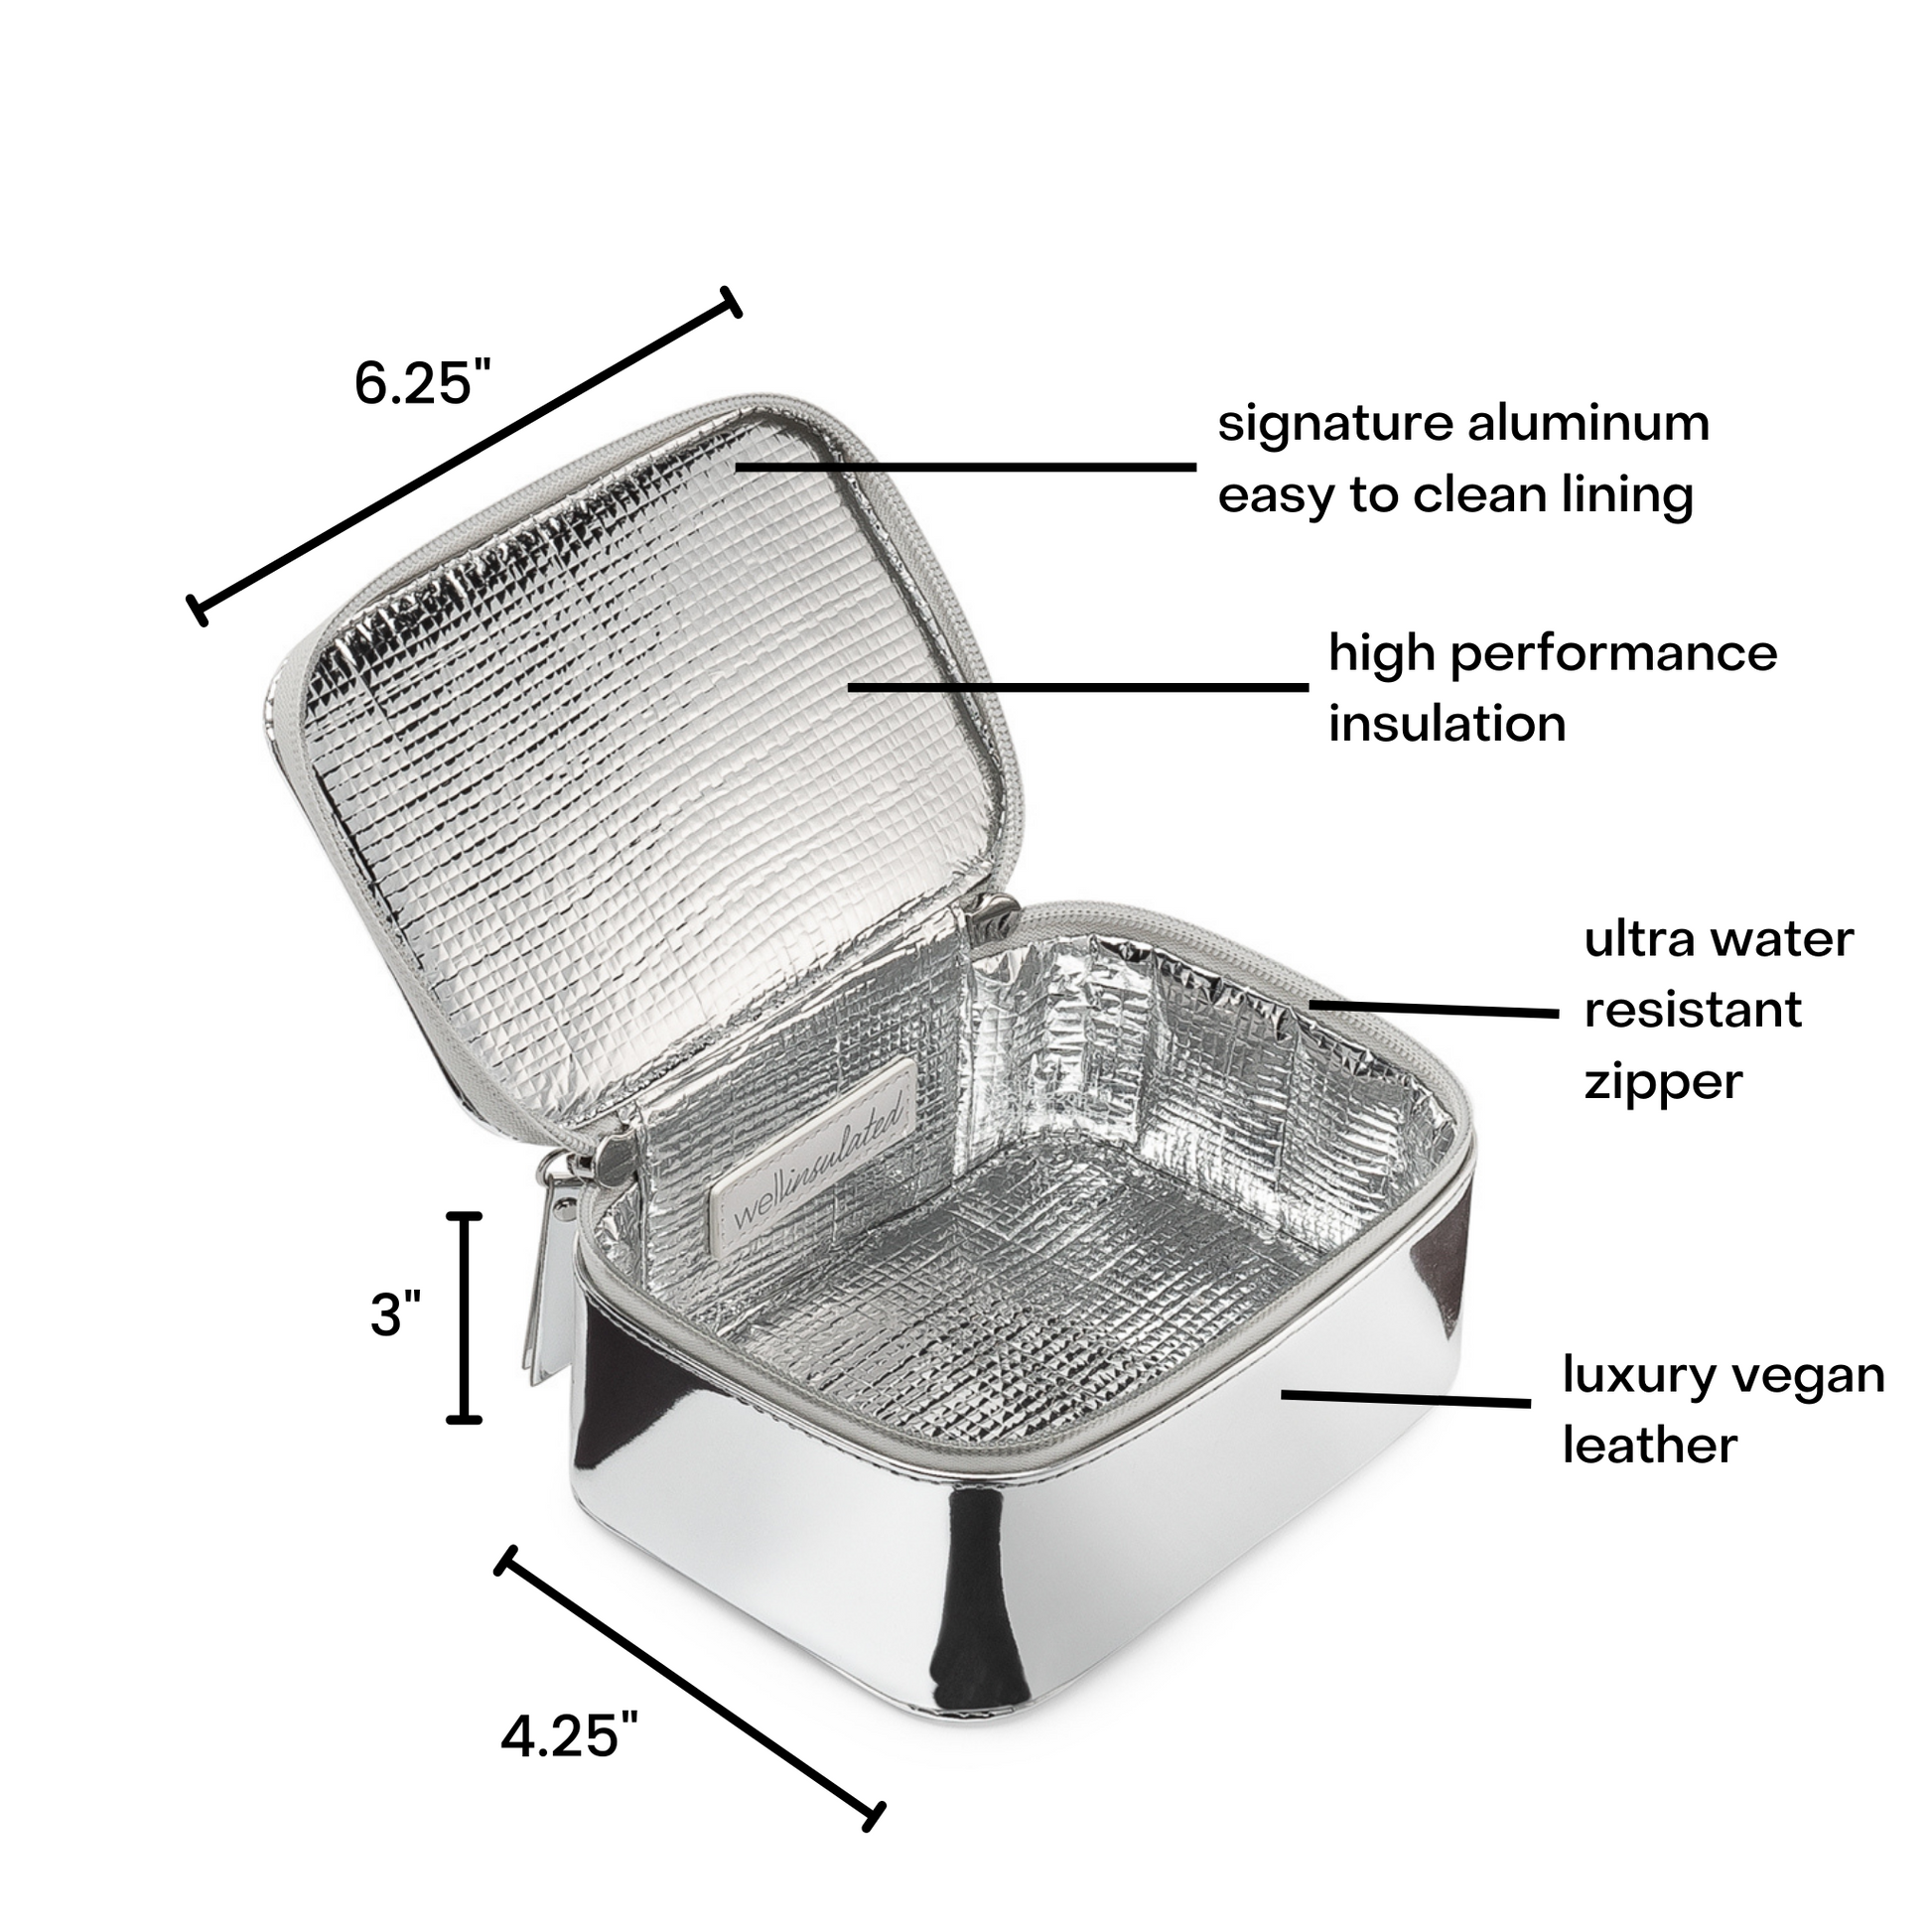 The well insulated performance mini travel case is open showing the silver lining of the bag. There is text pointing out various features of the bag as well as the dimensions.